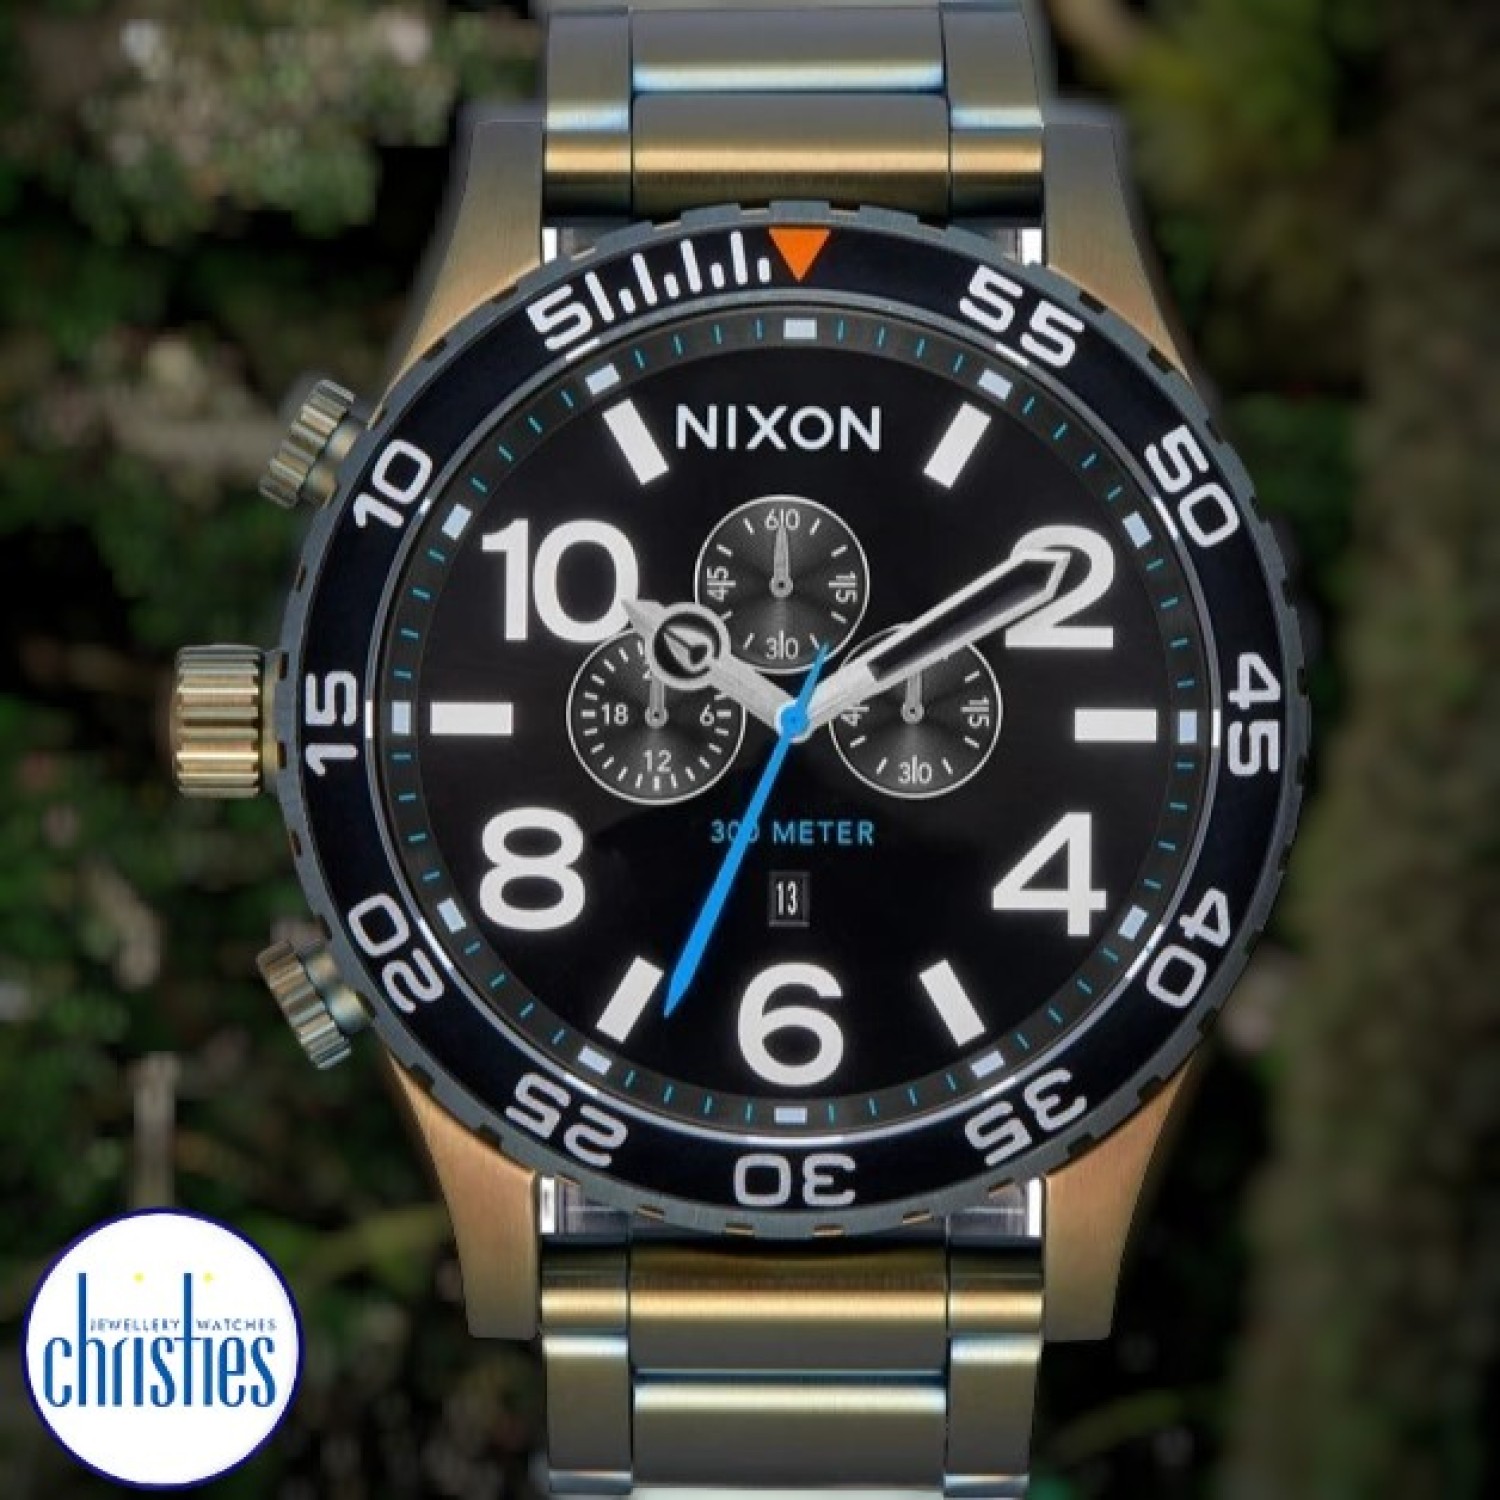 A083509200 NIXON 51-30 Chrono Watch A083-5092-00 NIXON Watches Auckland |Nixon watches are often chosen as gifts due to their stylish designs and functionality.